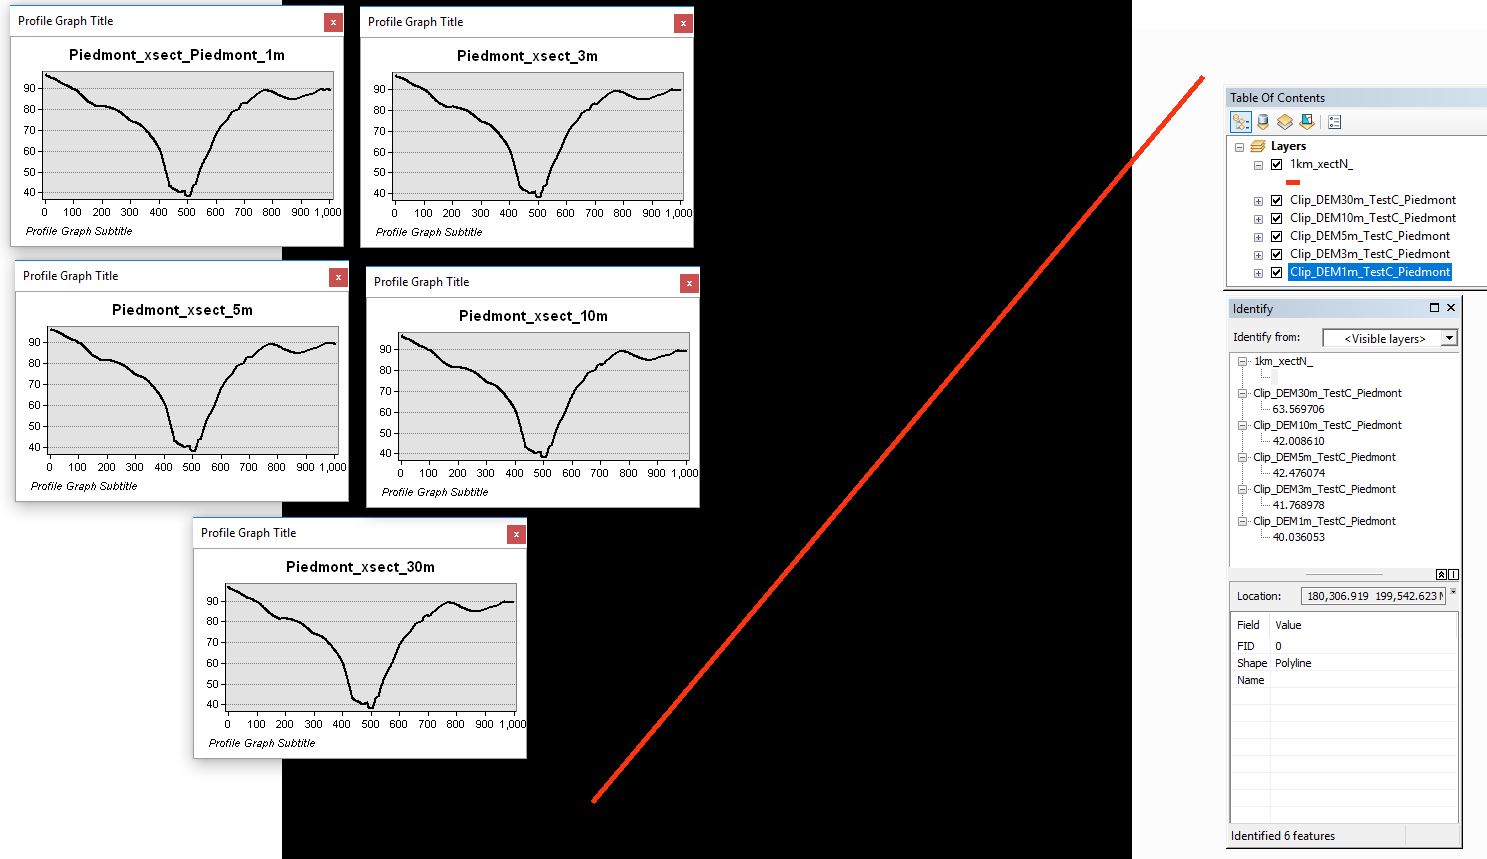 Screen shot of the 5 graphs and the Identify output of the visible layers